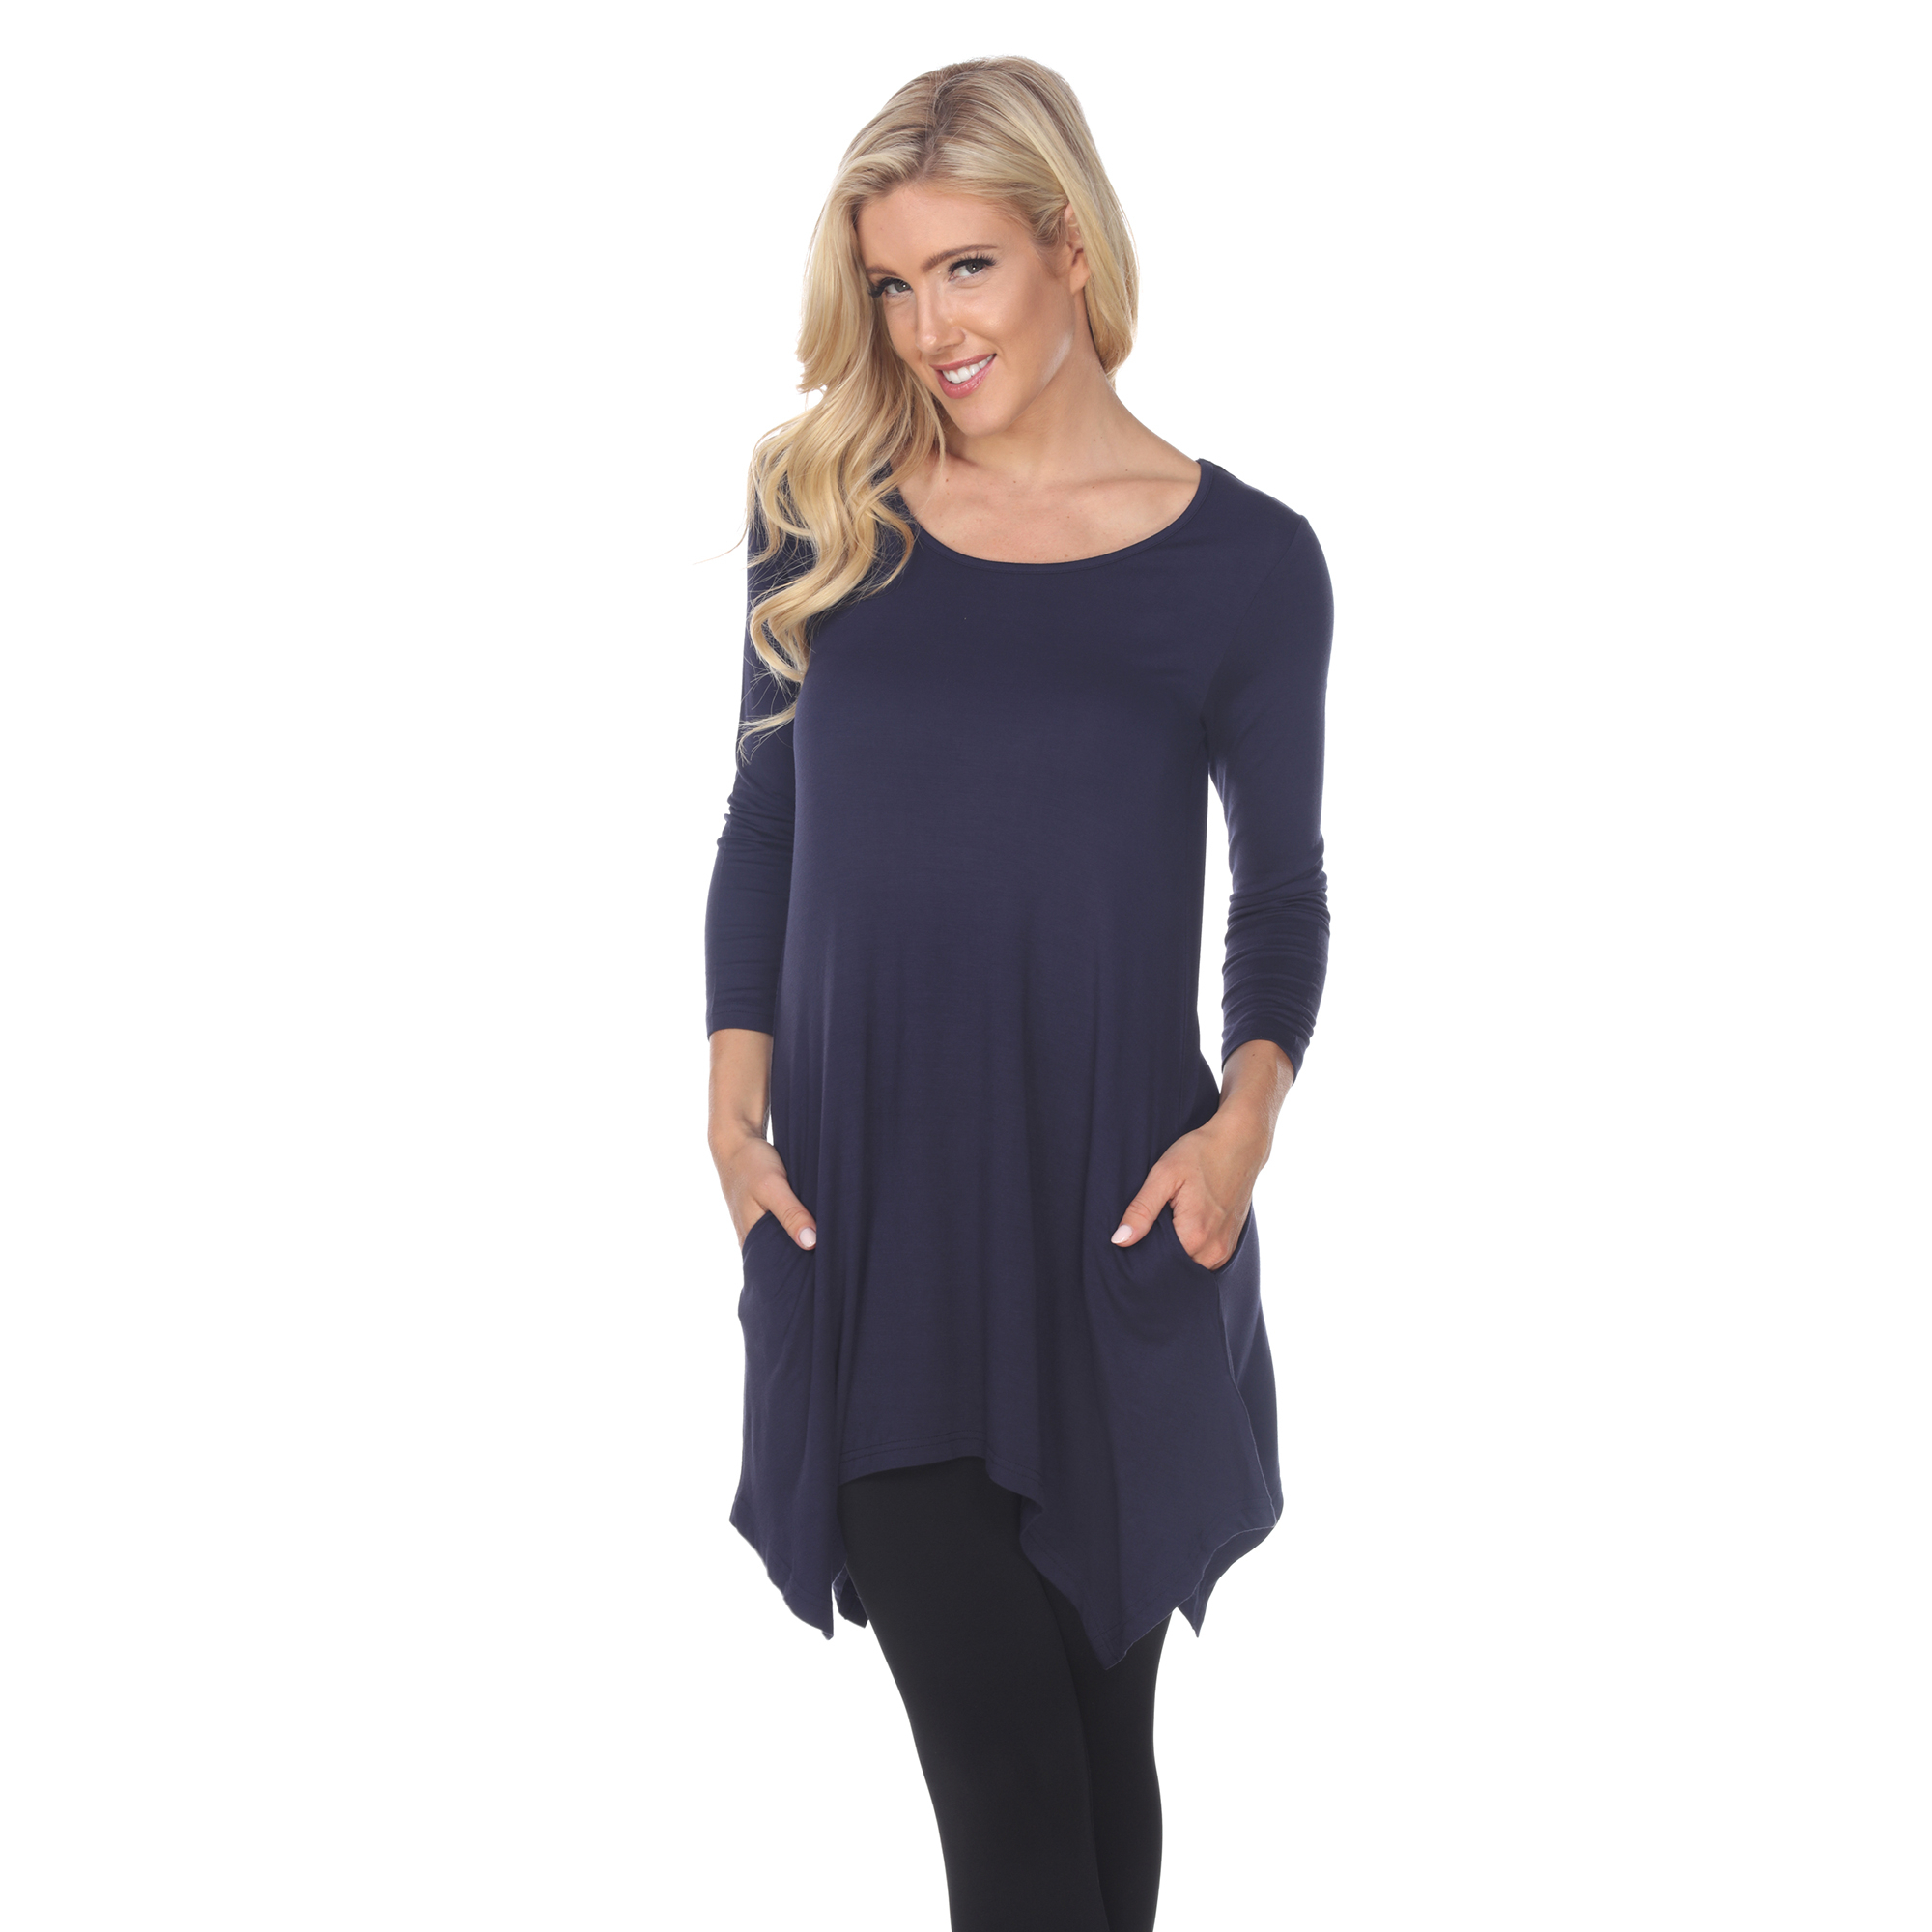 White Mark Women's Quarter Sleeve Tunic Top With Pockets - Navy, Small